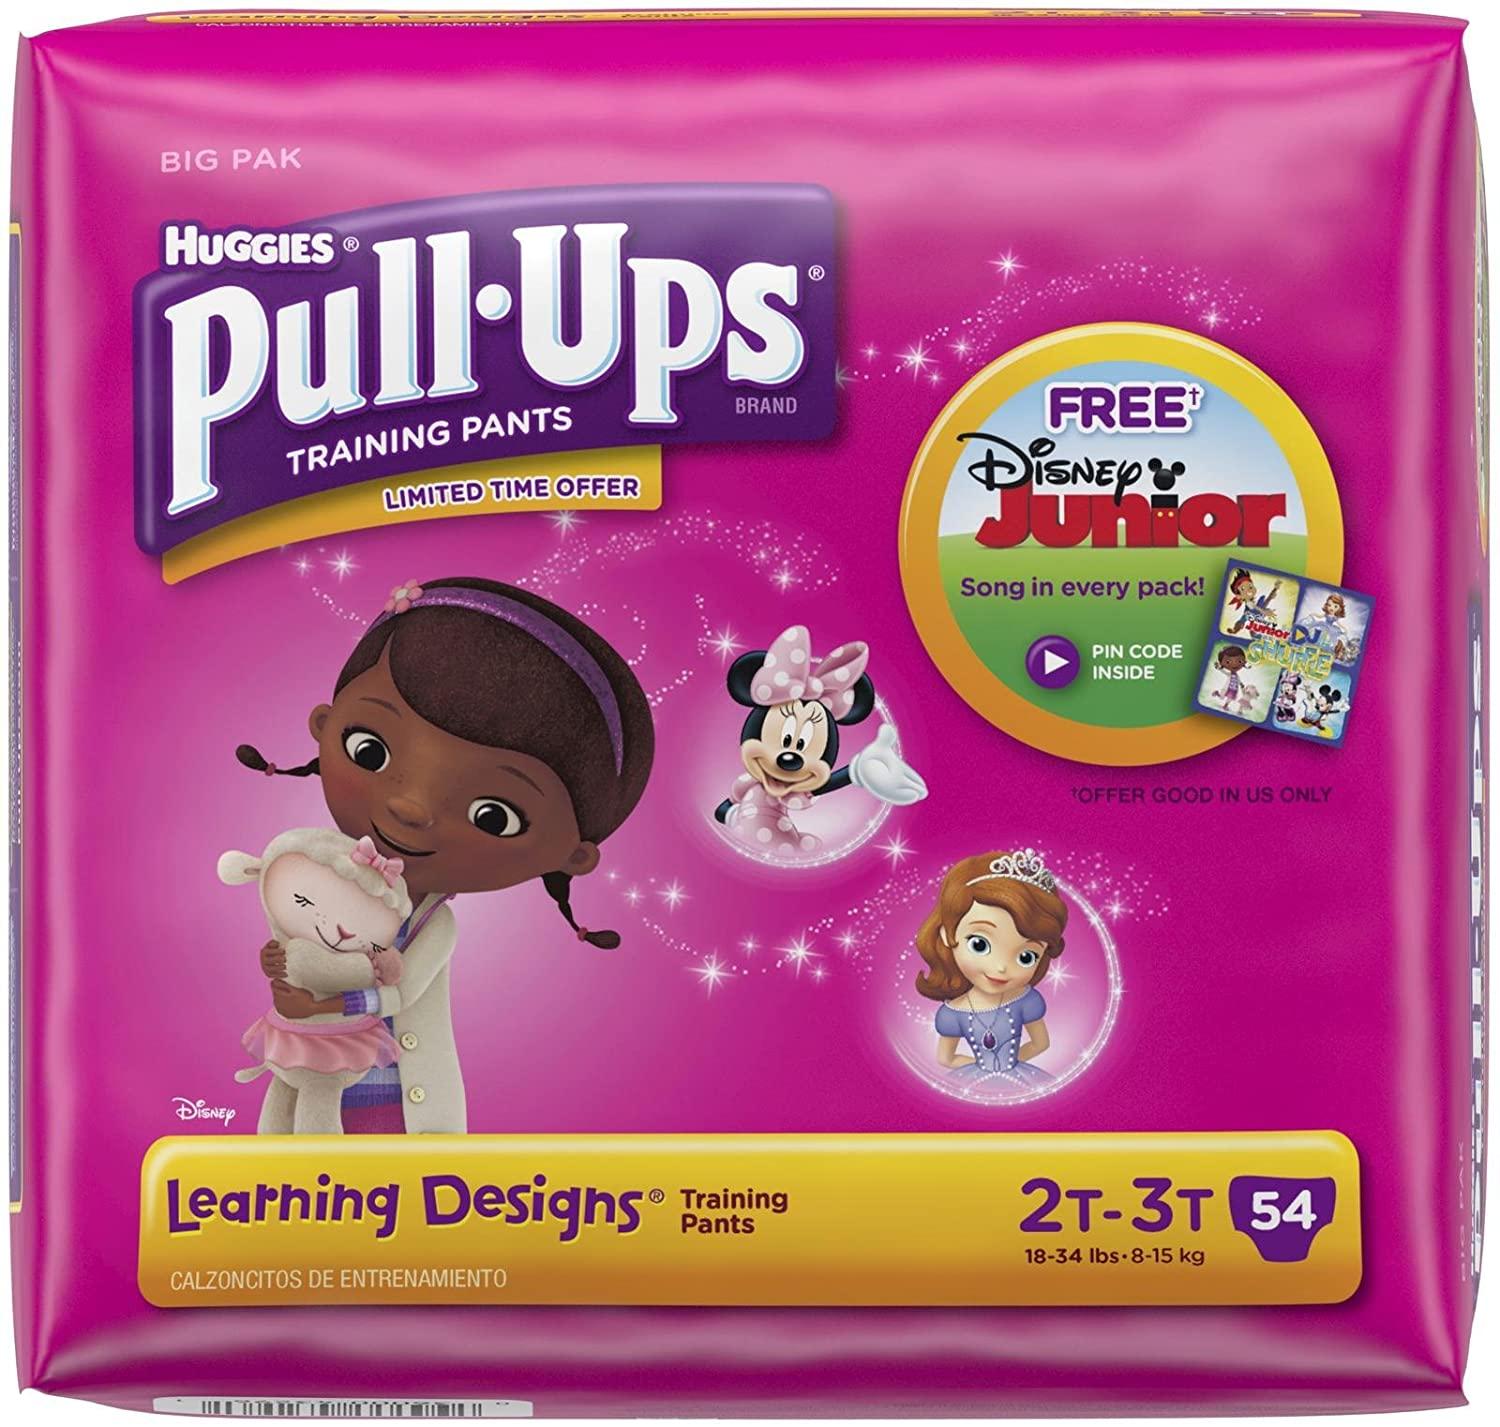 Huggies Pull-Ups Learning Designs Training Paints, 2T-3T, 54 Count